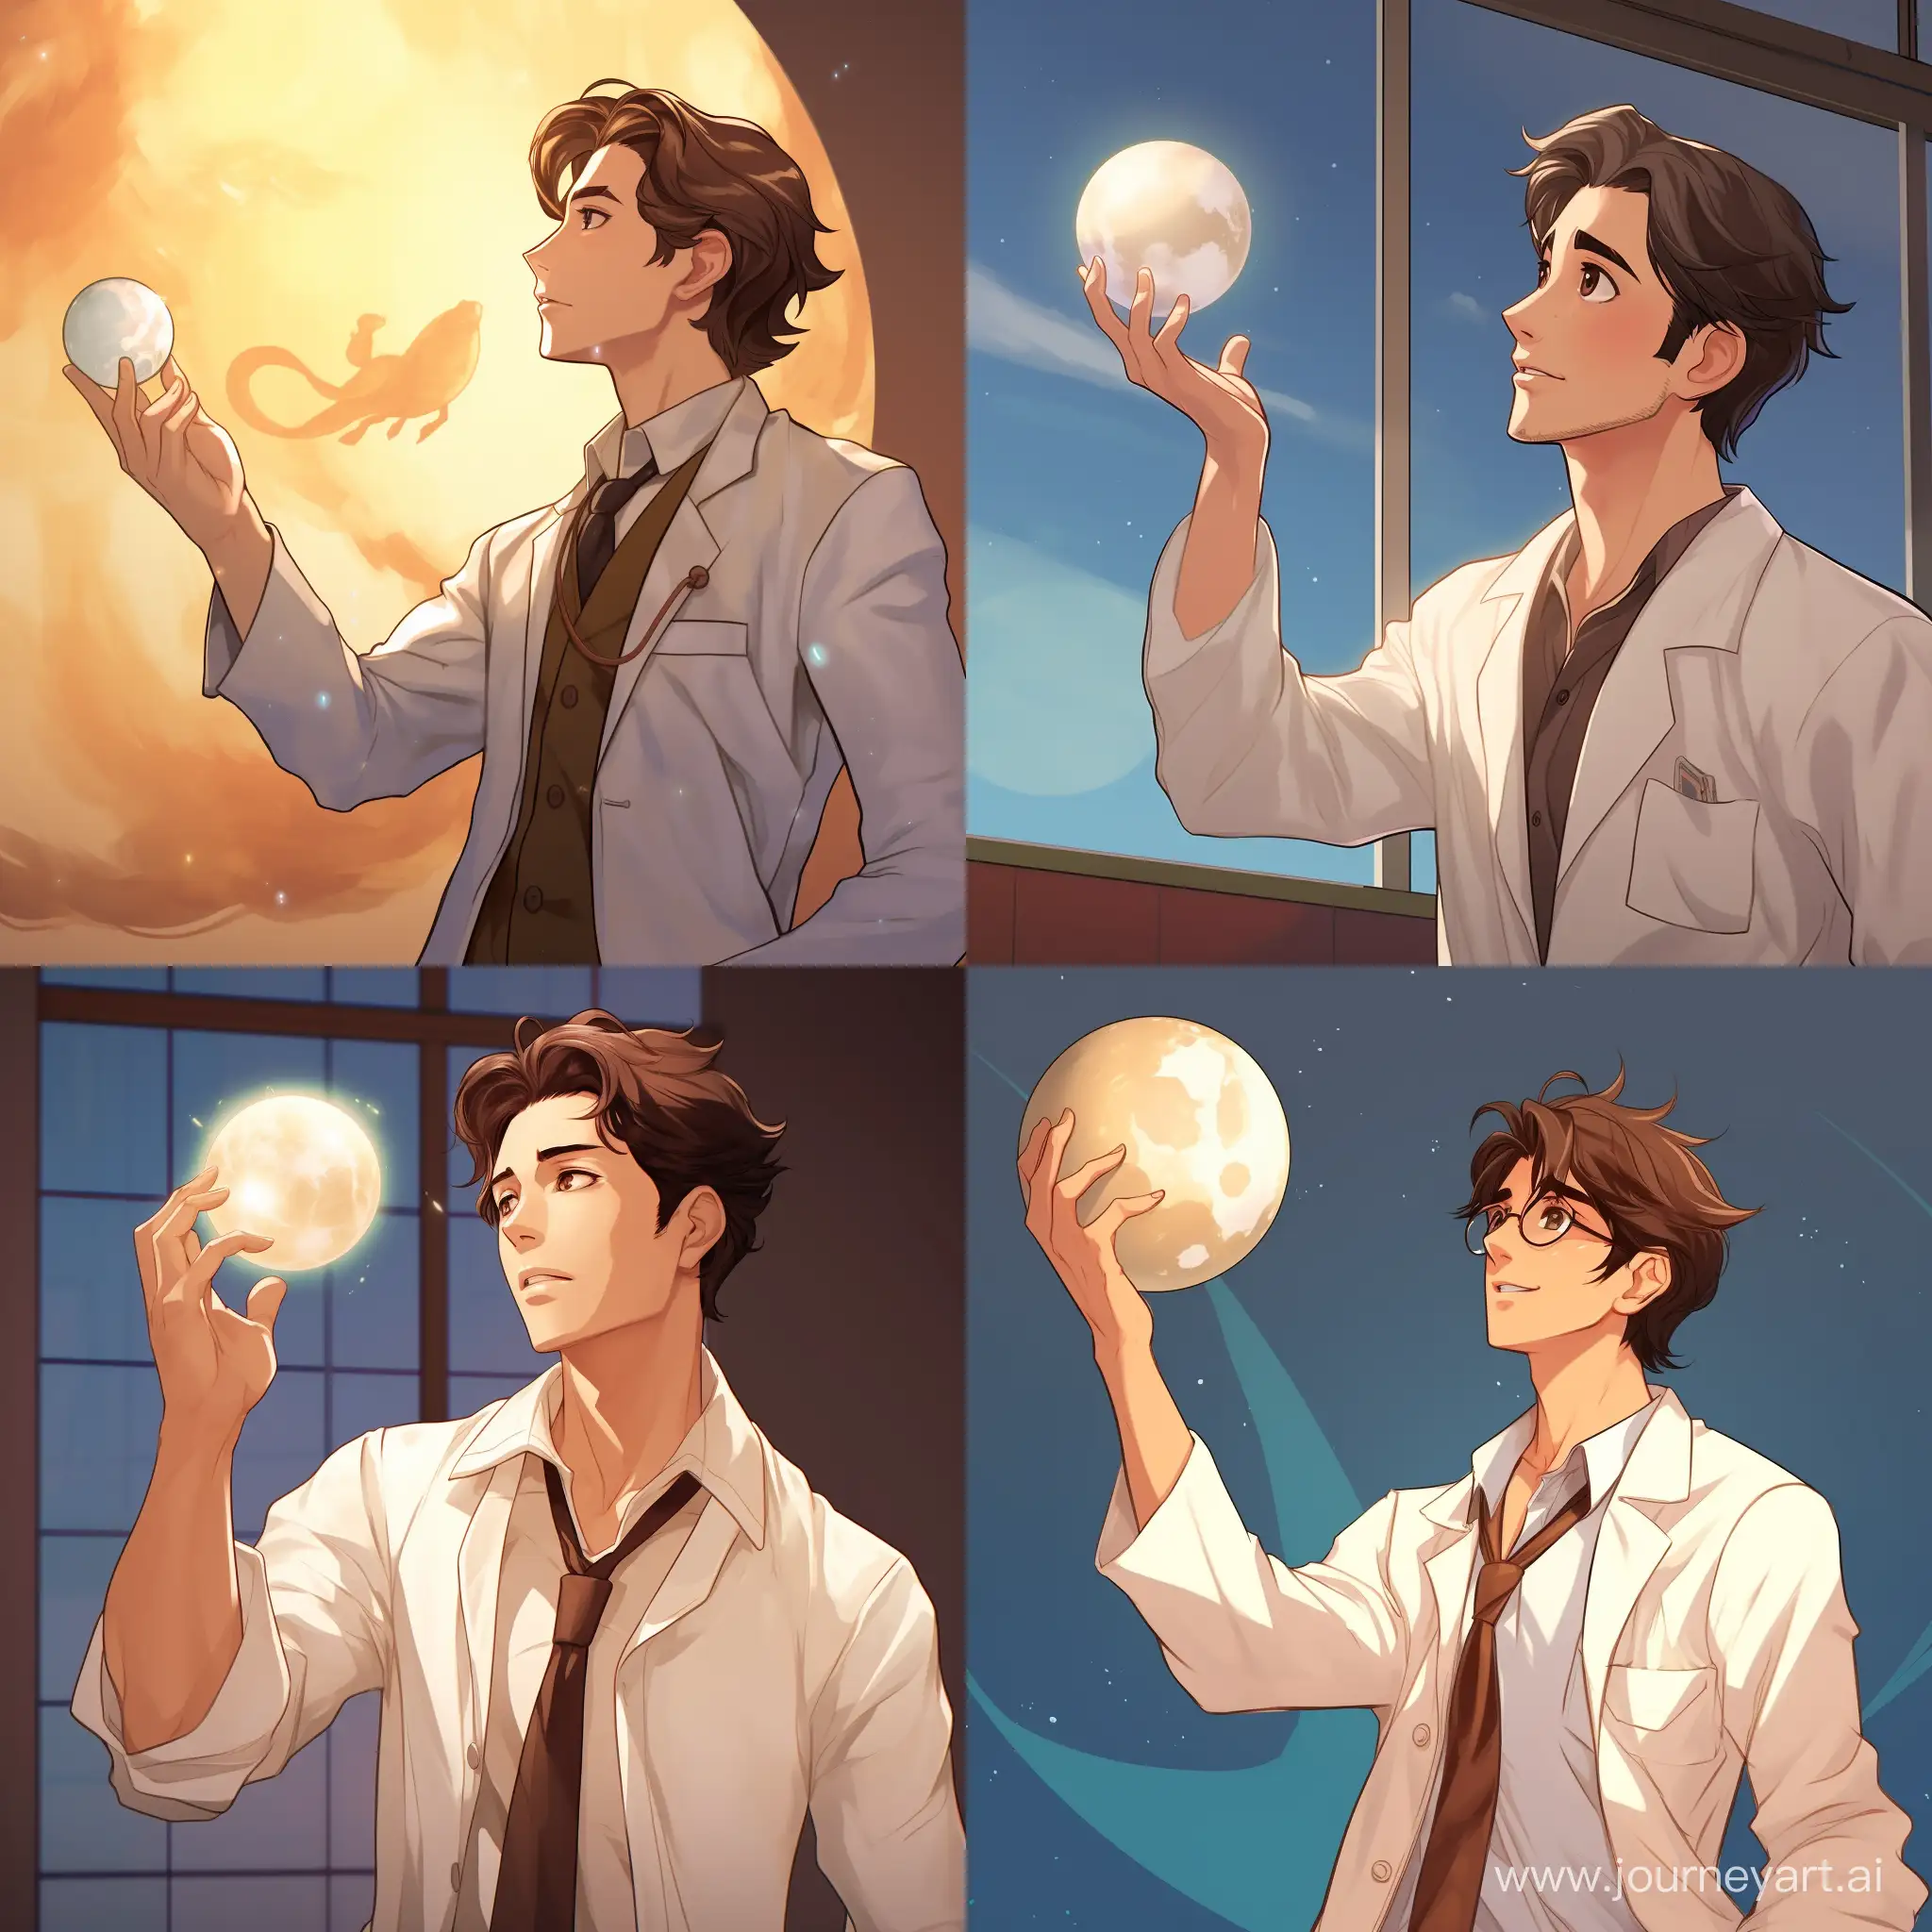 Create an anime-style illustration featuring a male scientist characterized by brown hair and attired in a lab coat. Capture him engaged in a scene where he is gazing at a small ball floating a few centimeters above his open right hand